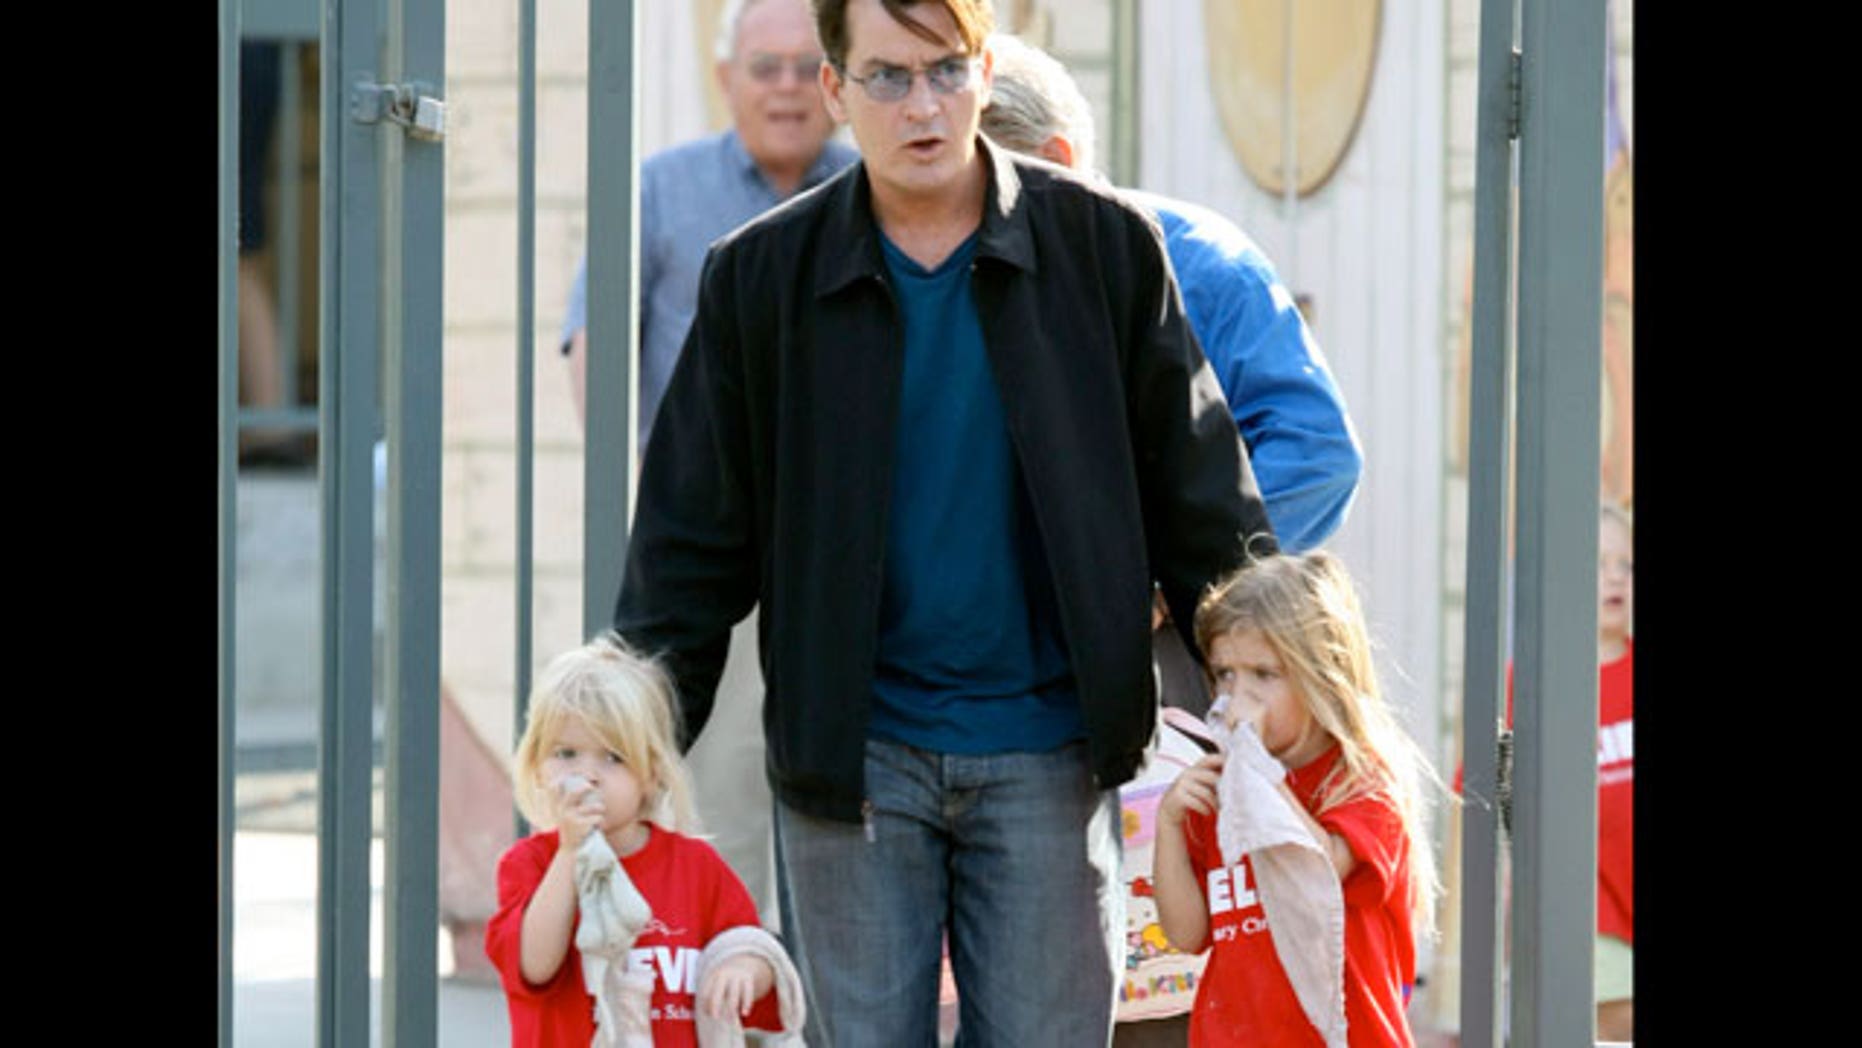 Experts: Charlie Sheen's Lifestyle Hurting His Kids, Career Could Be